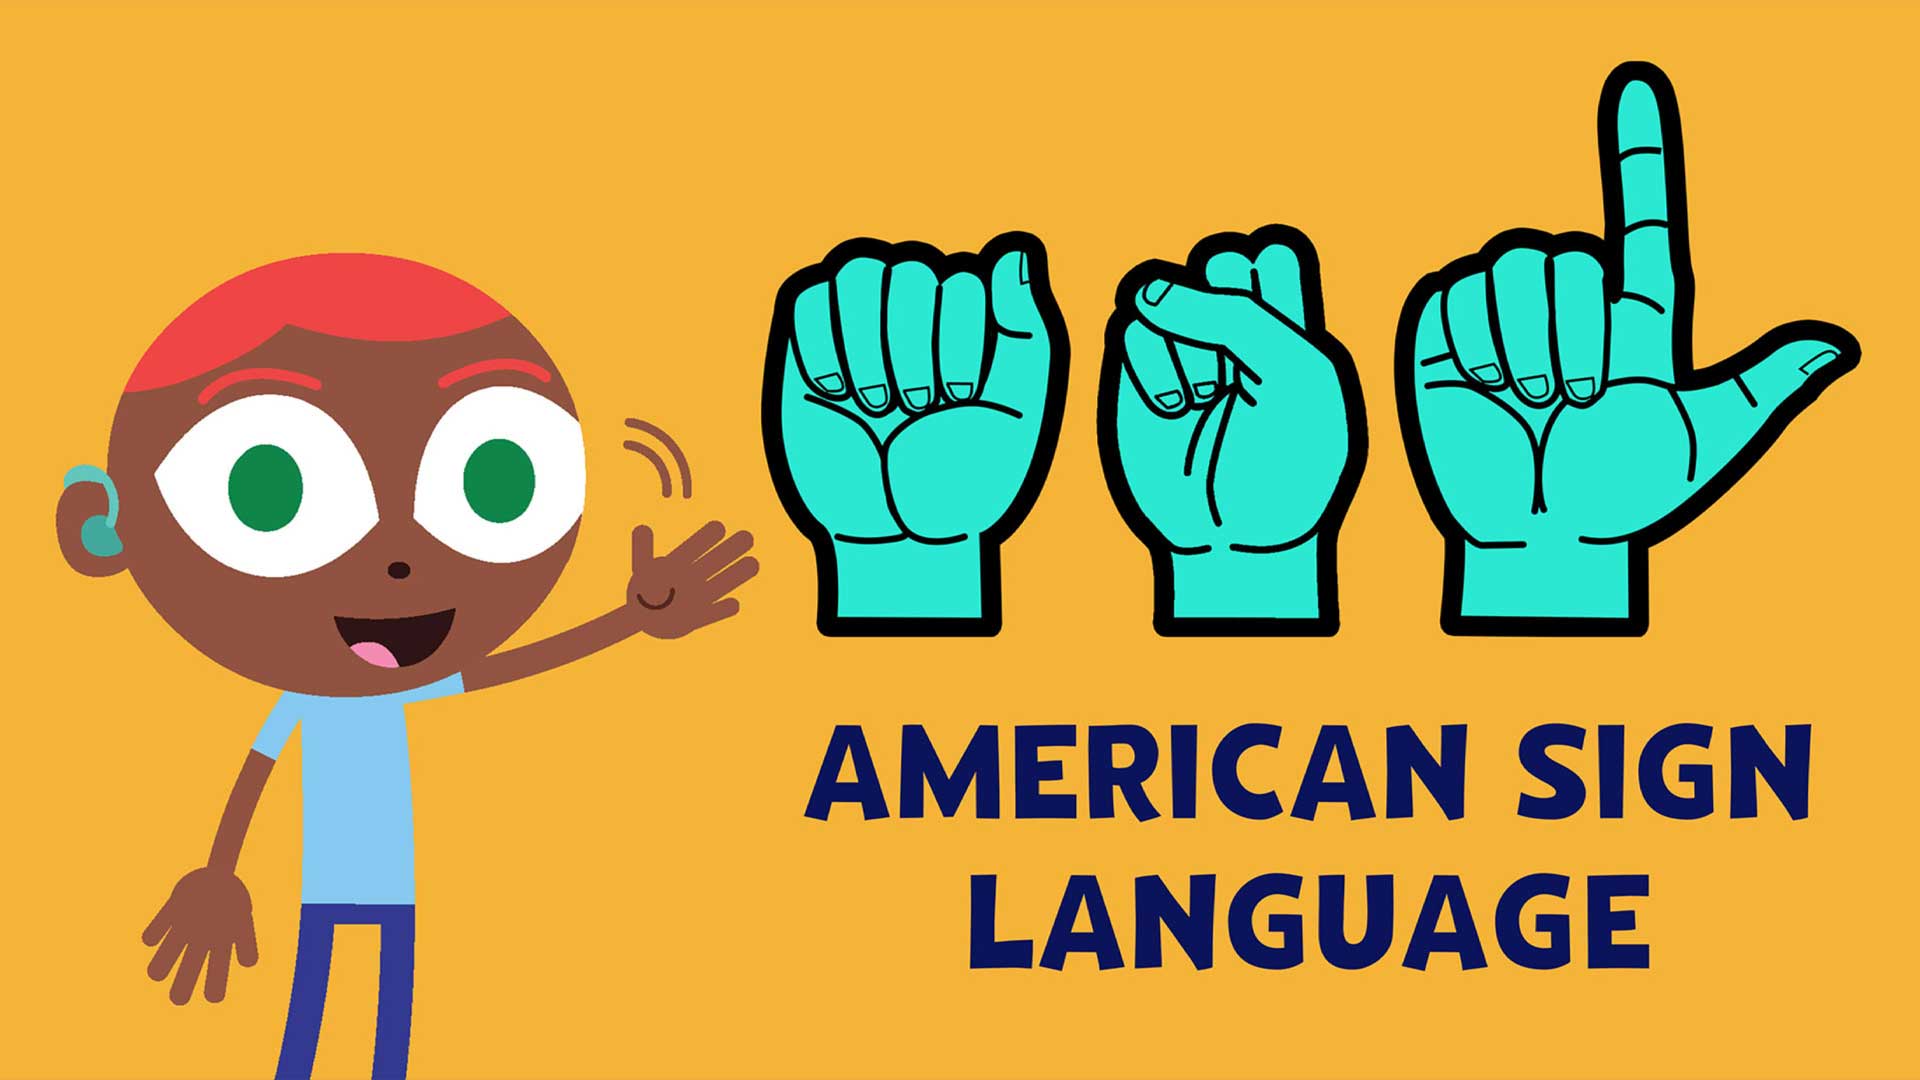 PBS Kids adds American Sign Language interpreters to some shows